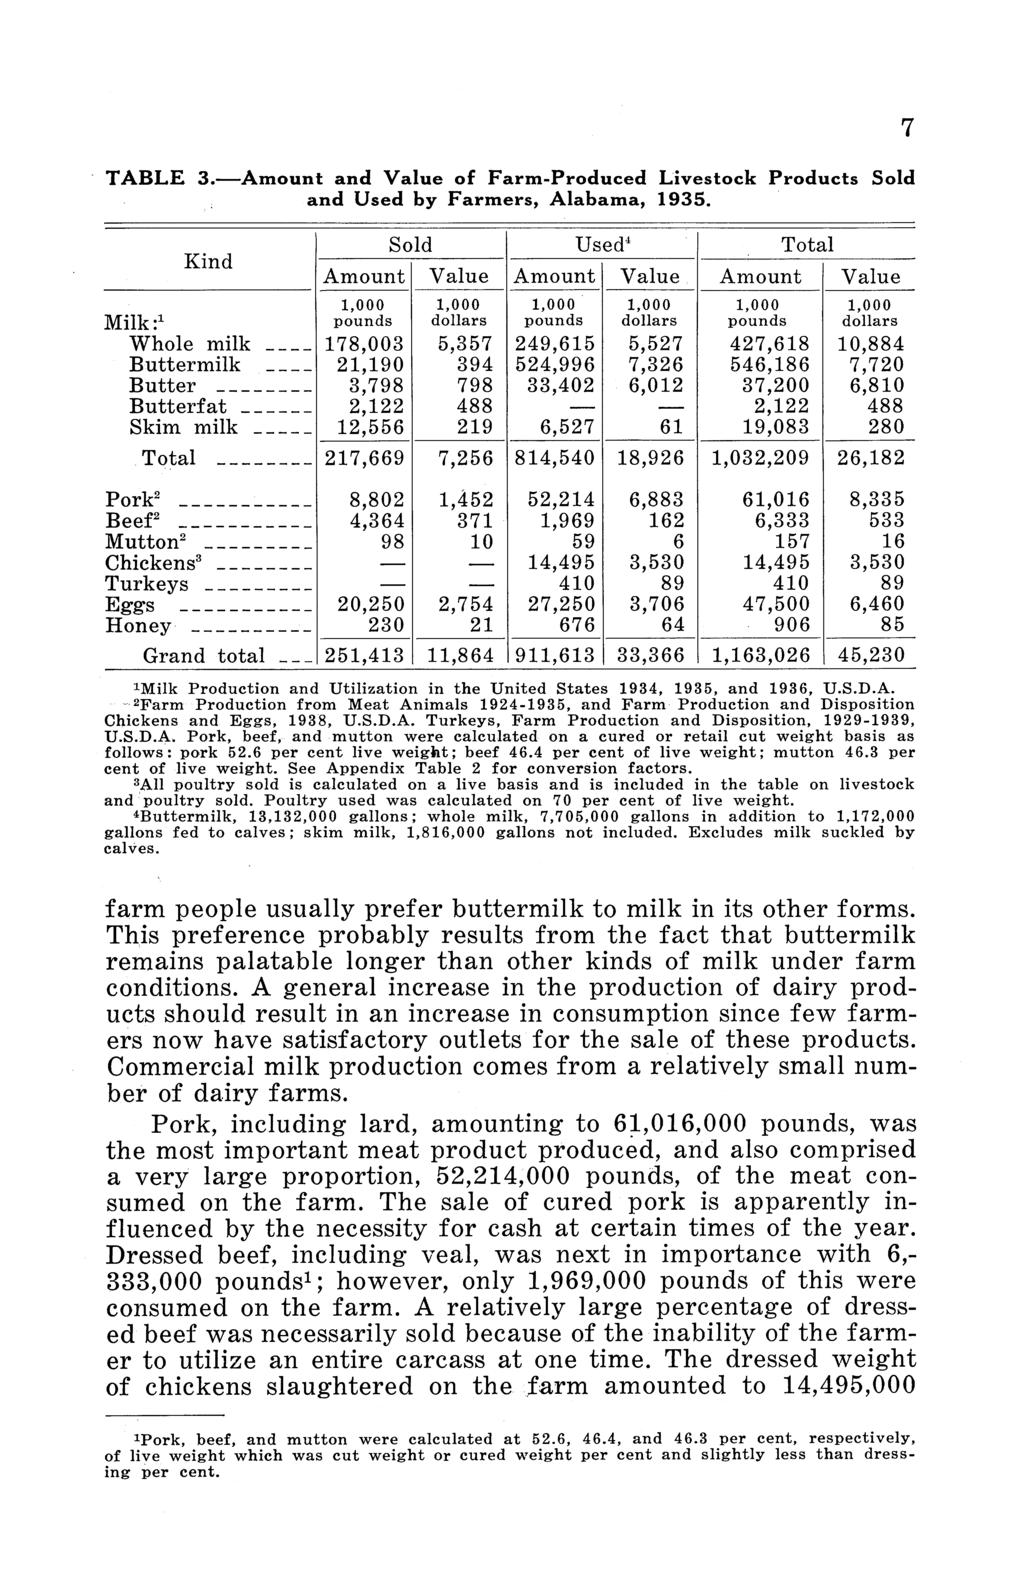 TABLE 3.-Amount and Value of Farm-Produced Livestock Products Sold and Used by Farmers, Alabama, 1935.